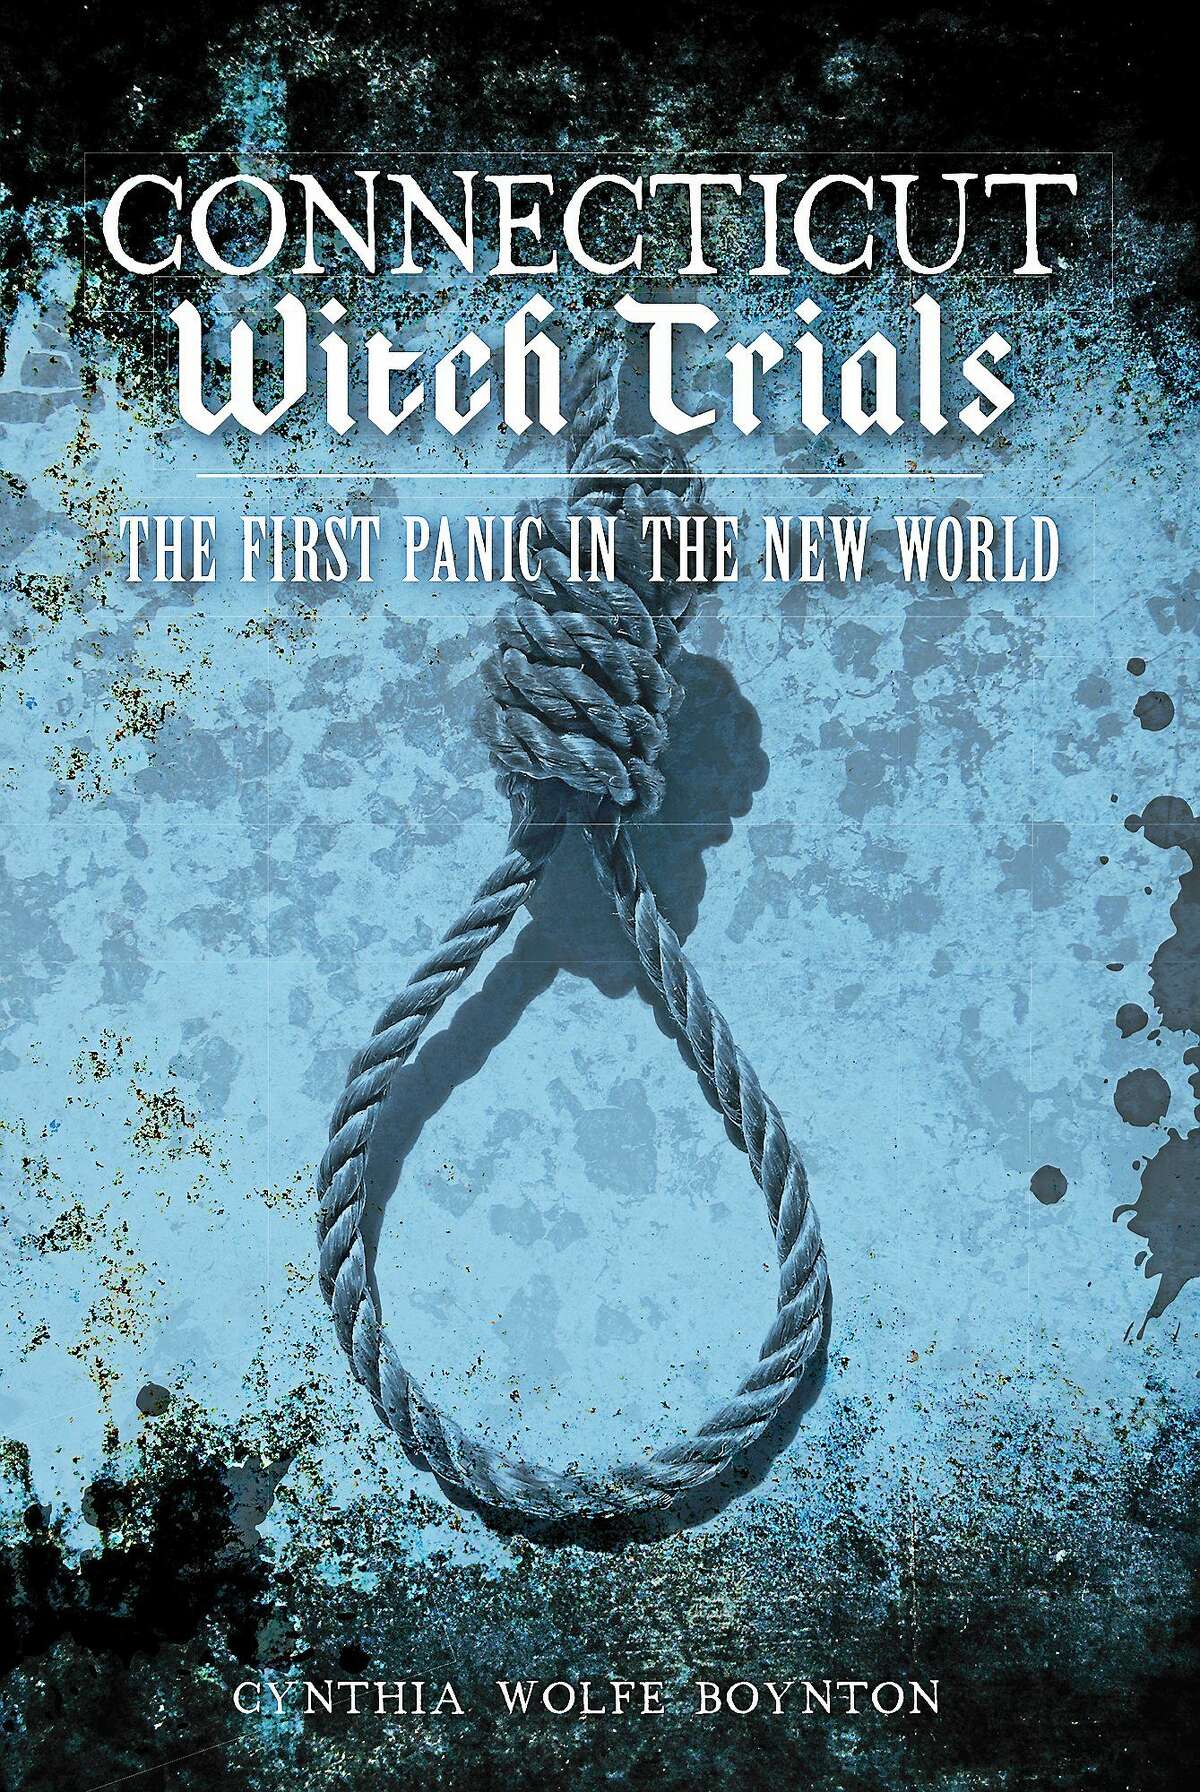 The book cover for “Connecticut Witch Trials: The First Panic in the New World.”